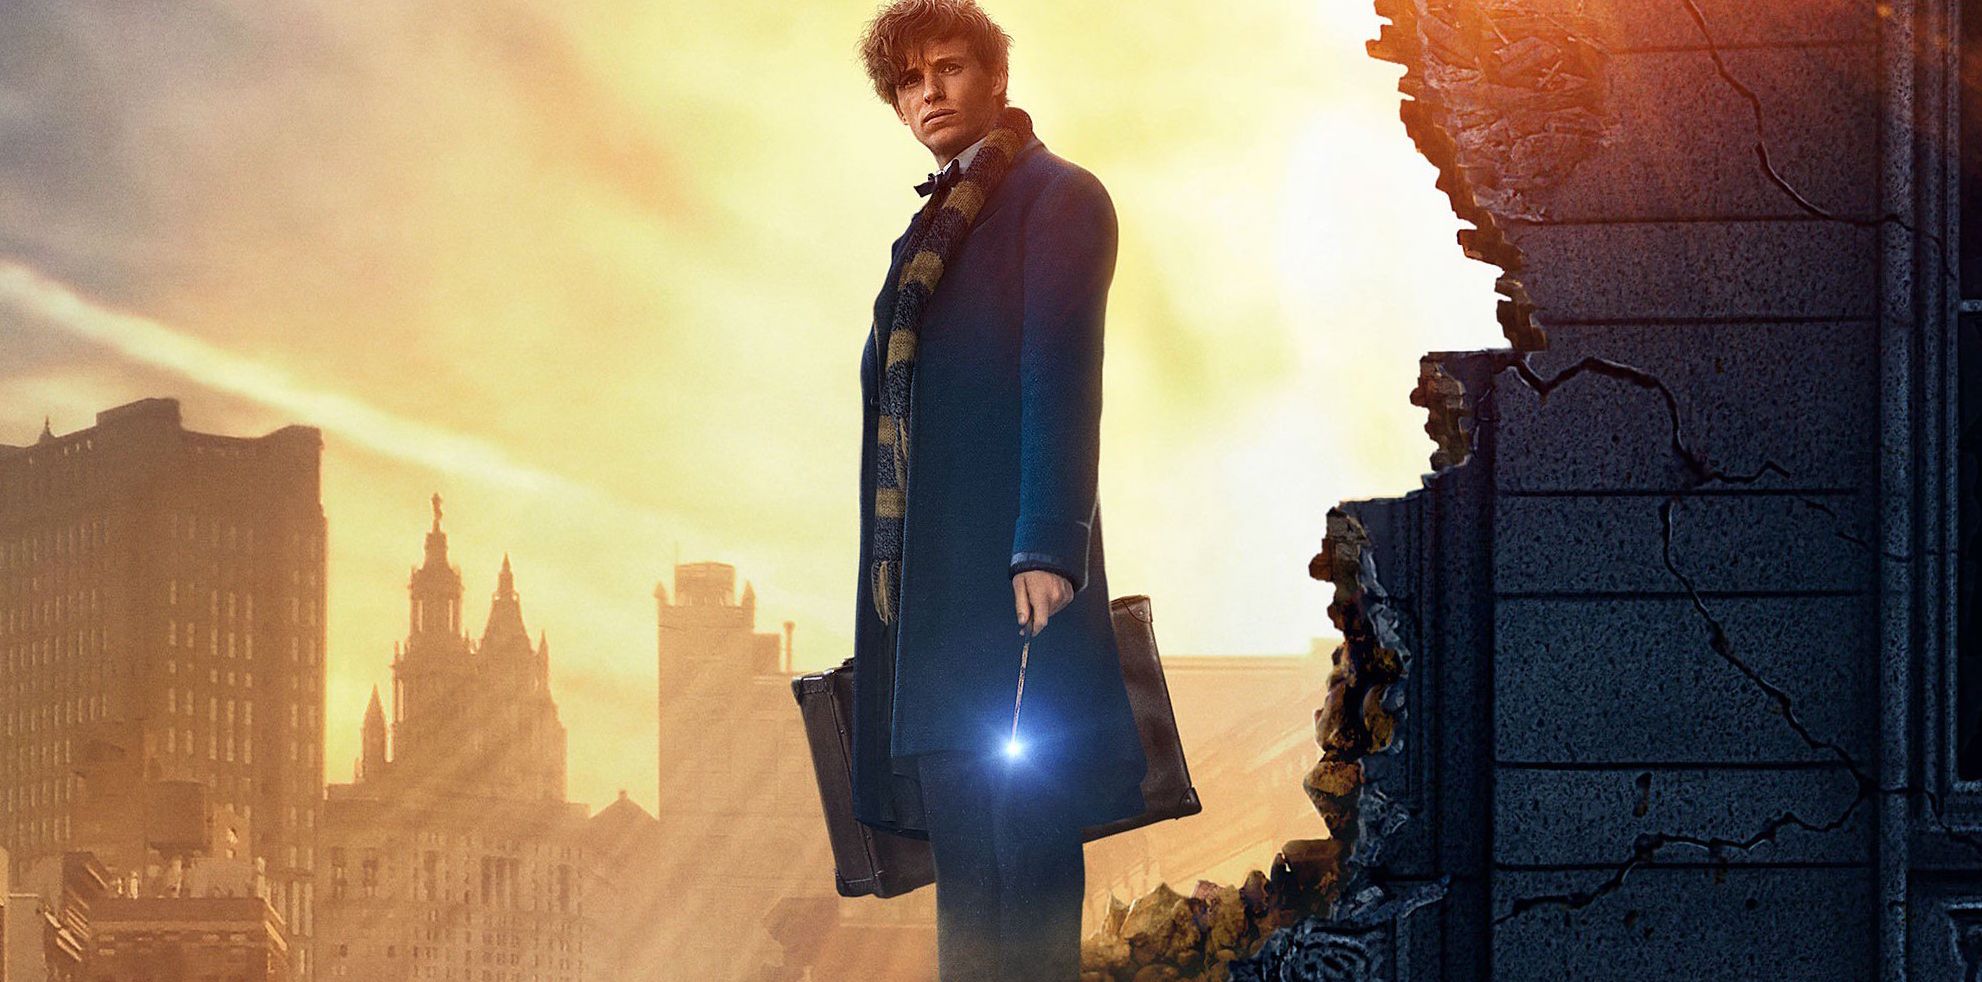 Watch Film 2016 Fantastic Beasts And Where To Find Them Online